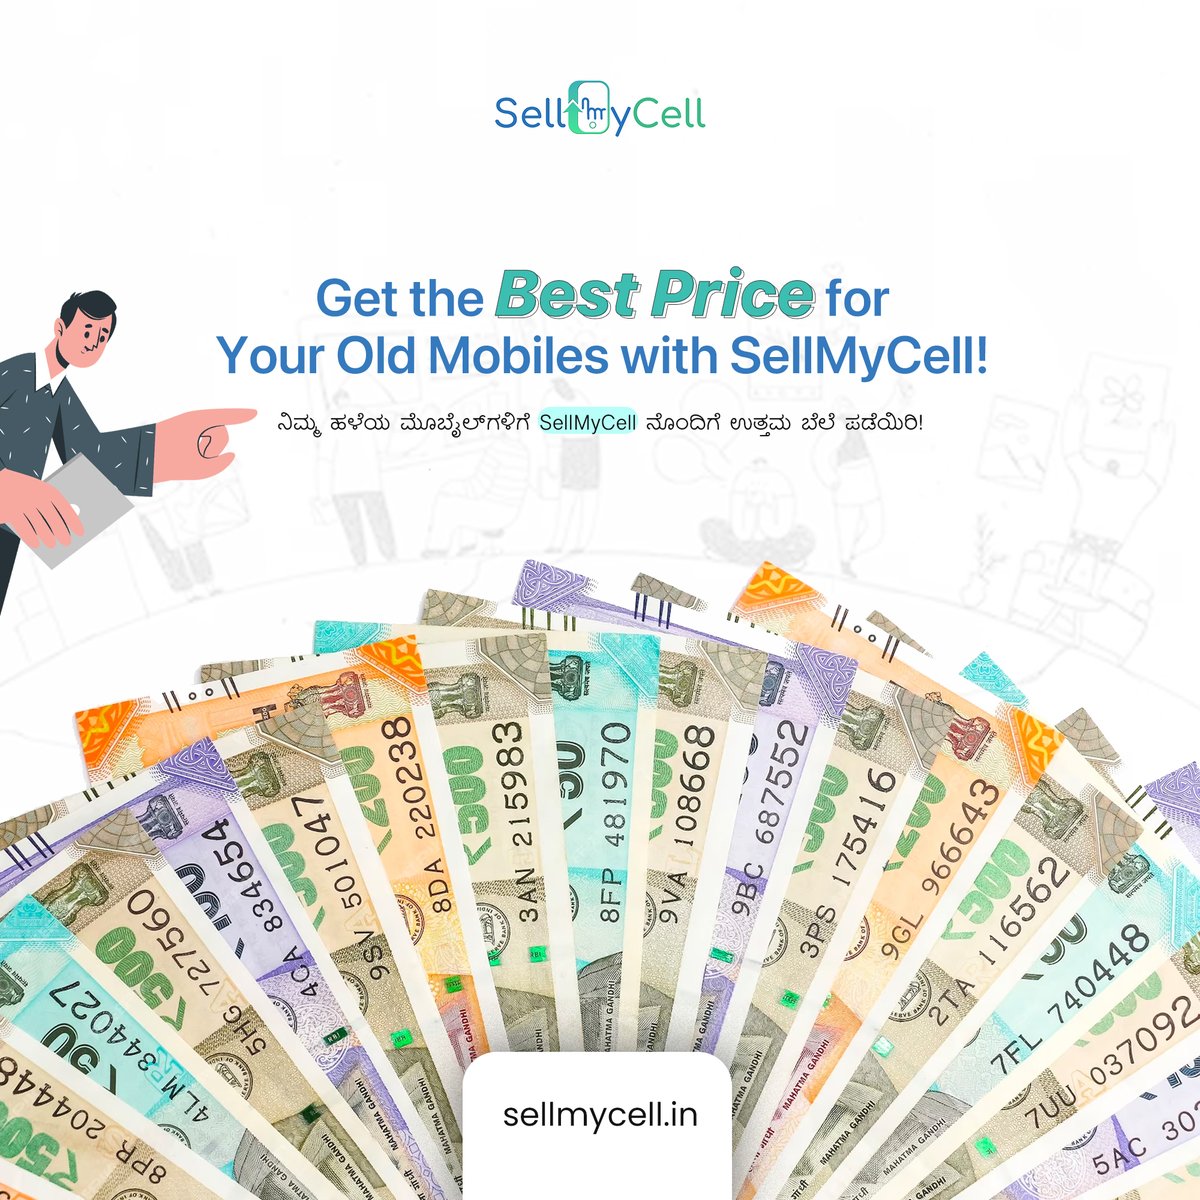 Unlock the best deal for your mobile! 💸 SellMyCell guarantees you the top price. Let's turn your device into cash gold! 📱✨
#BestPriceGuarantee #SellMyCell #UpgradeInStyle #FreePickup #InstantCash #SellOldPhone #selloldphone #smartphones #sellusedphone